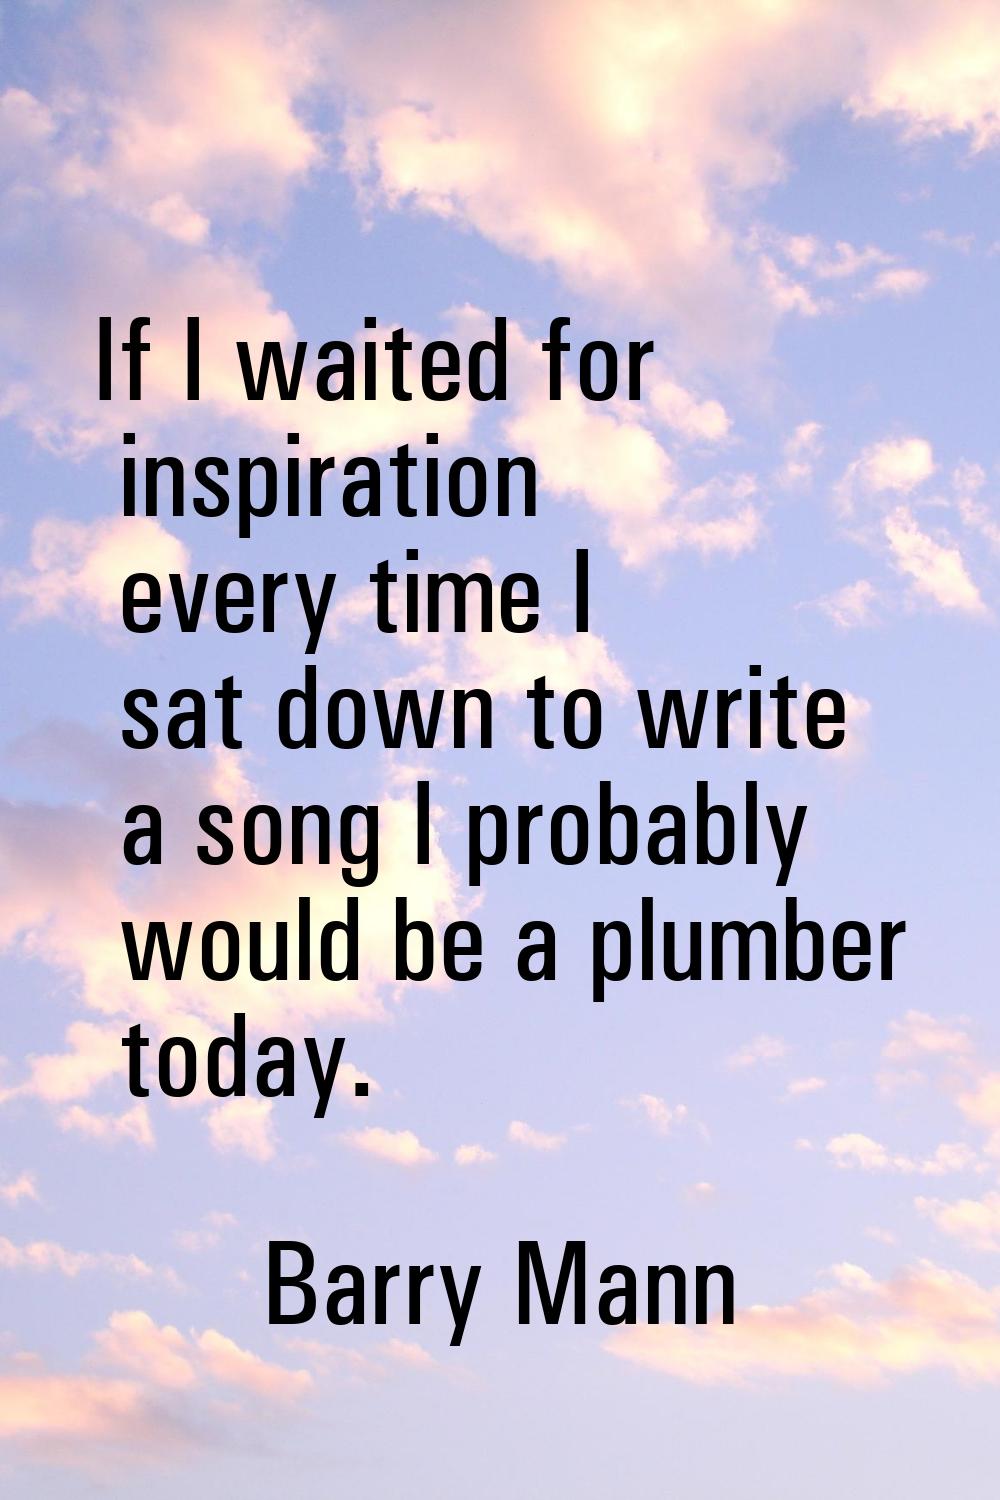 If I waited for inspiration every time I sat down to write a song I probably would be a plumber tod